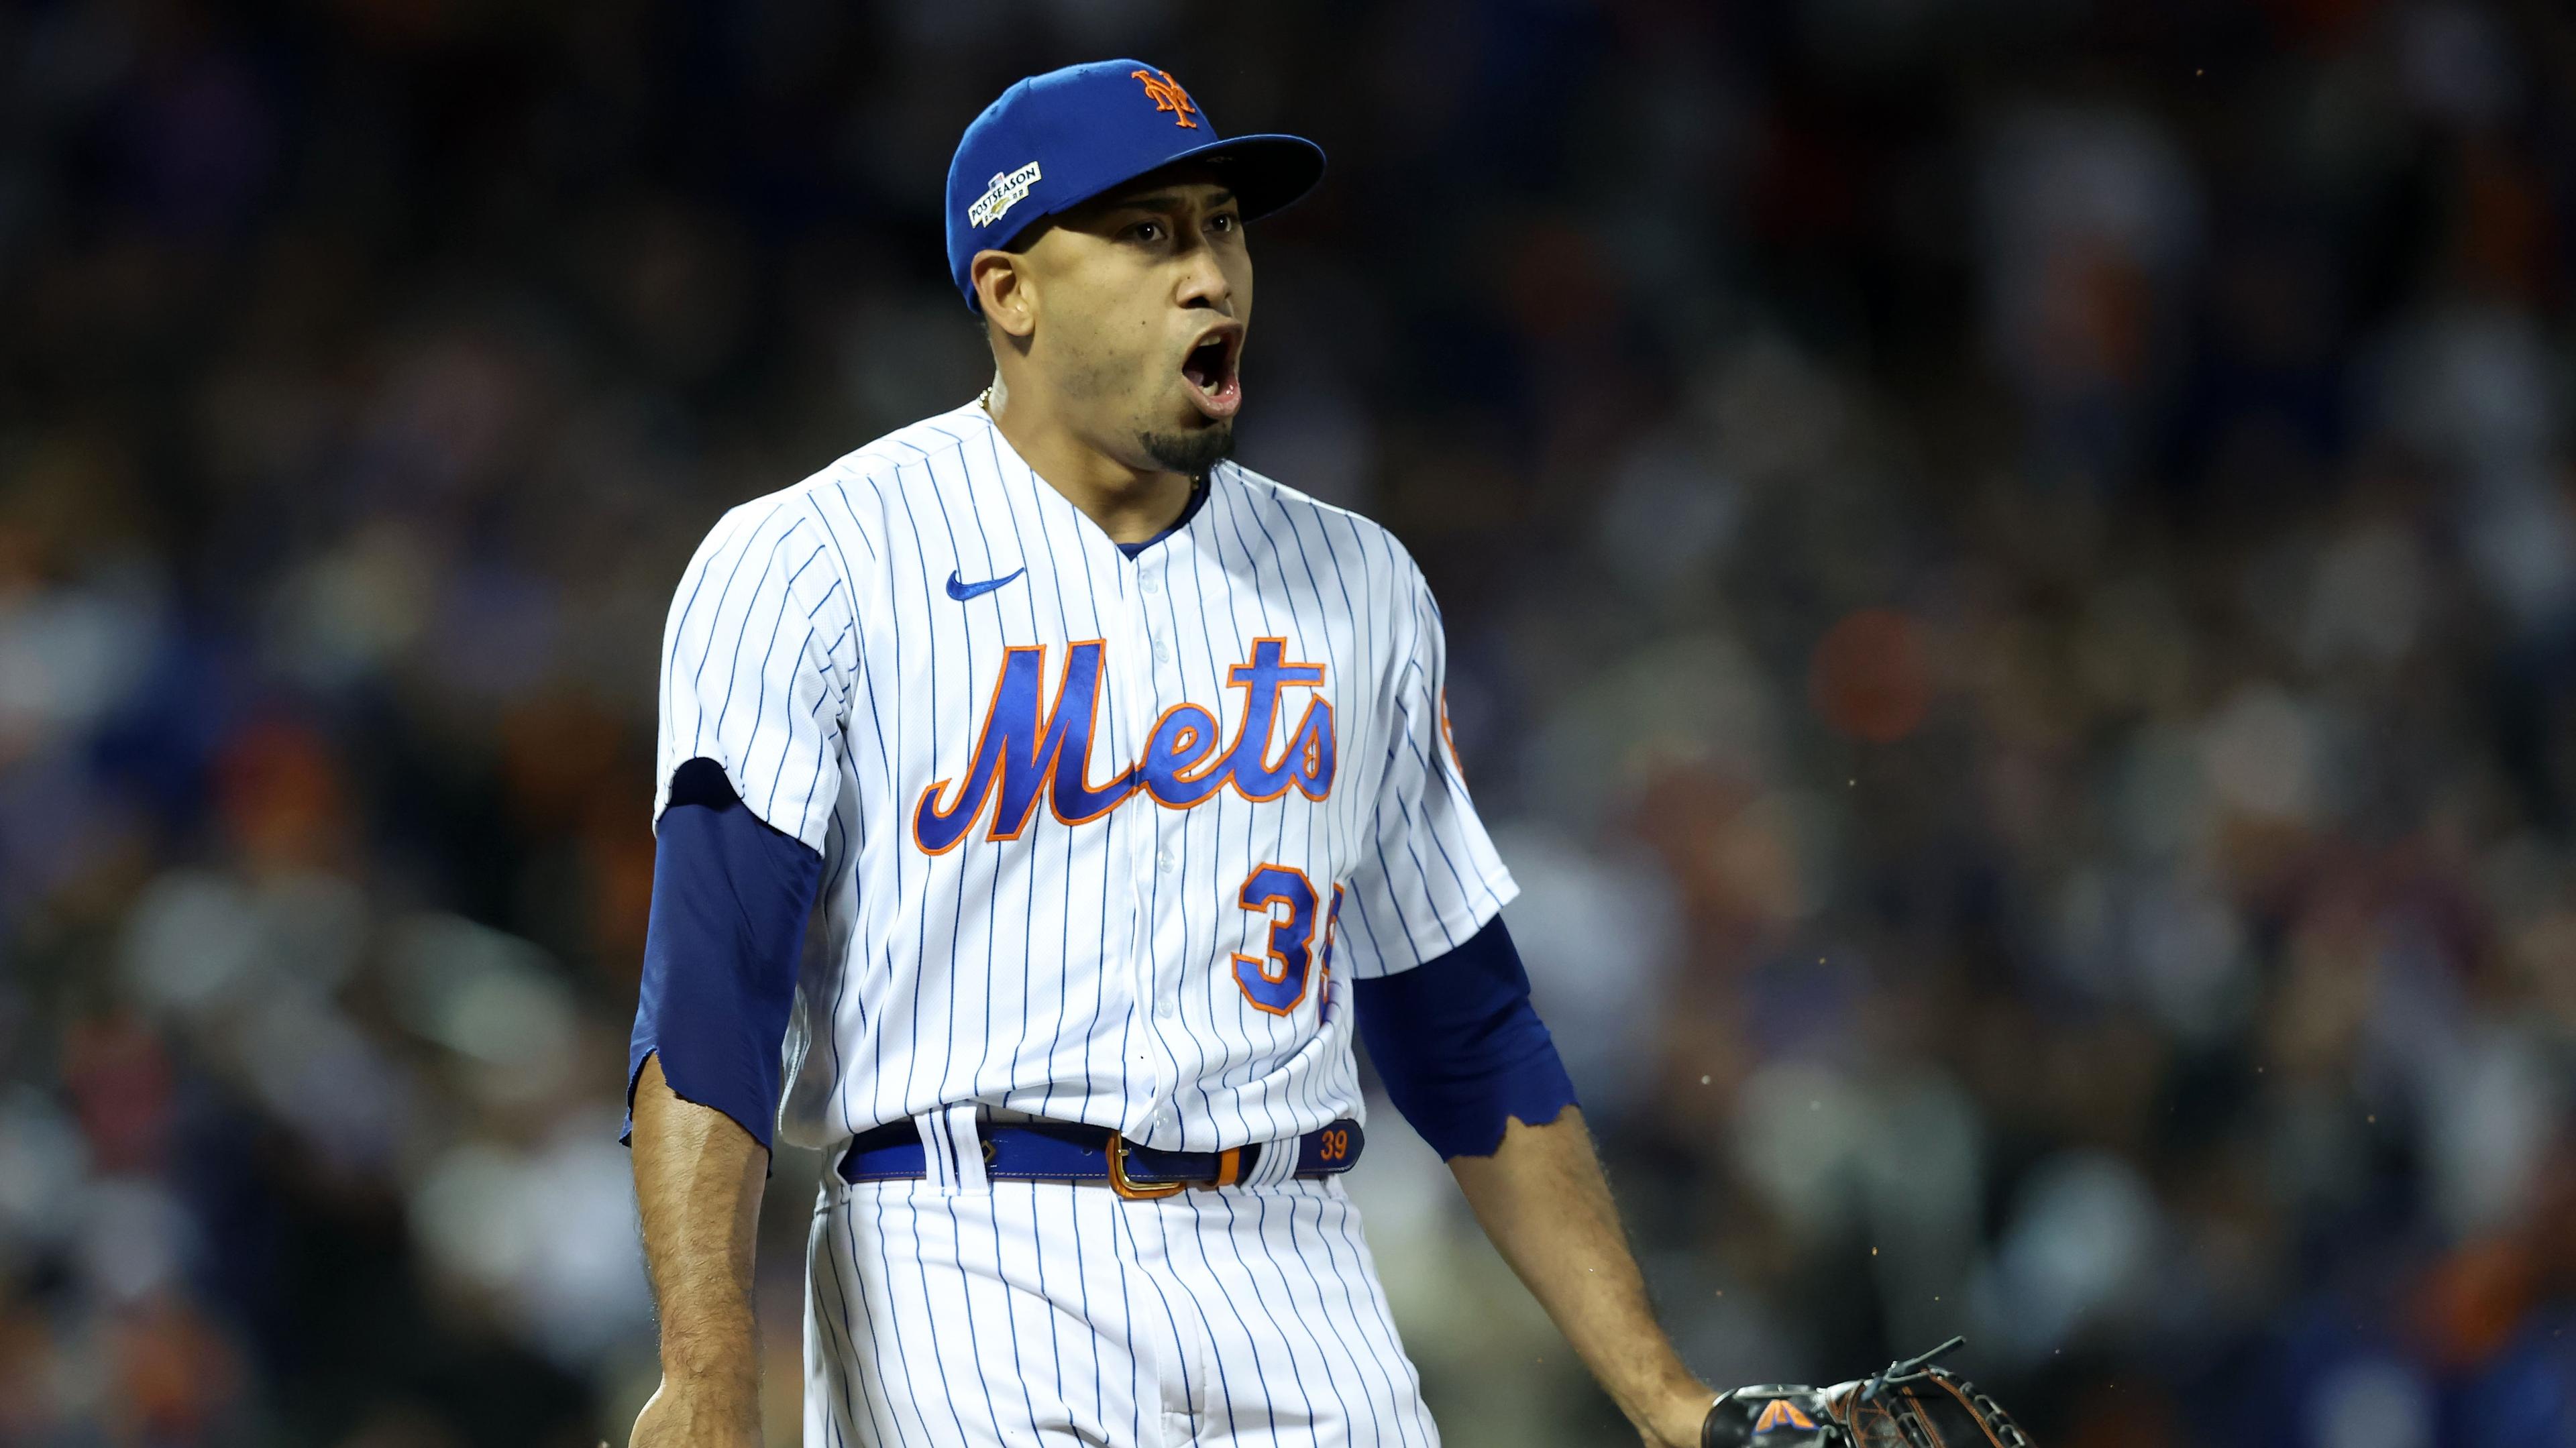 Oct 8, 2022; New York City, New York, USA; New York Mets relief pitcher Edwin Diaz (39) reacts after getting San Diego Padres center fielder Trent Grisham (not pictured) out in the seventh inning during game two of the Wild Card series for the 2022 MLB Playoffs at Citi Field. Mandatory Credit: Brad Penner-USA TODAY Sports / © Brad Penner-USA TODAY Sports